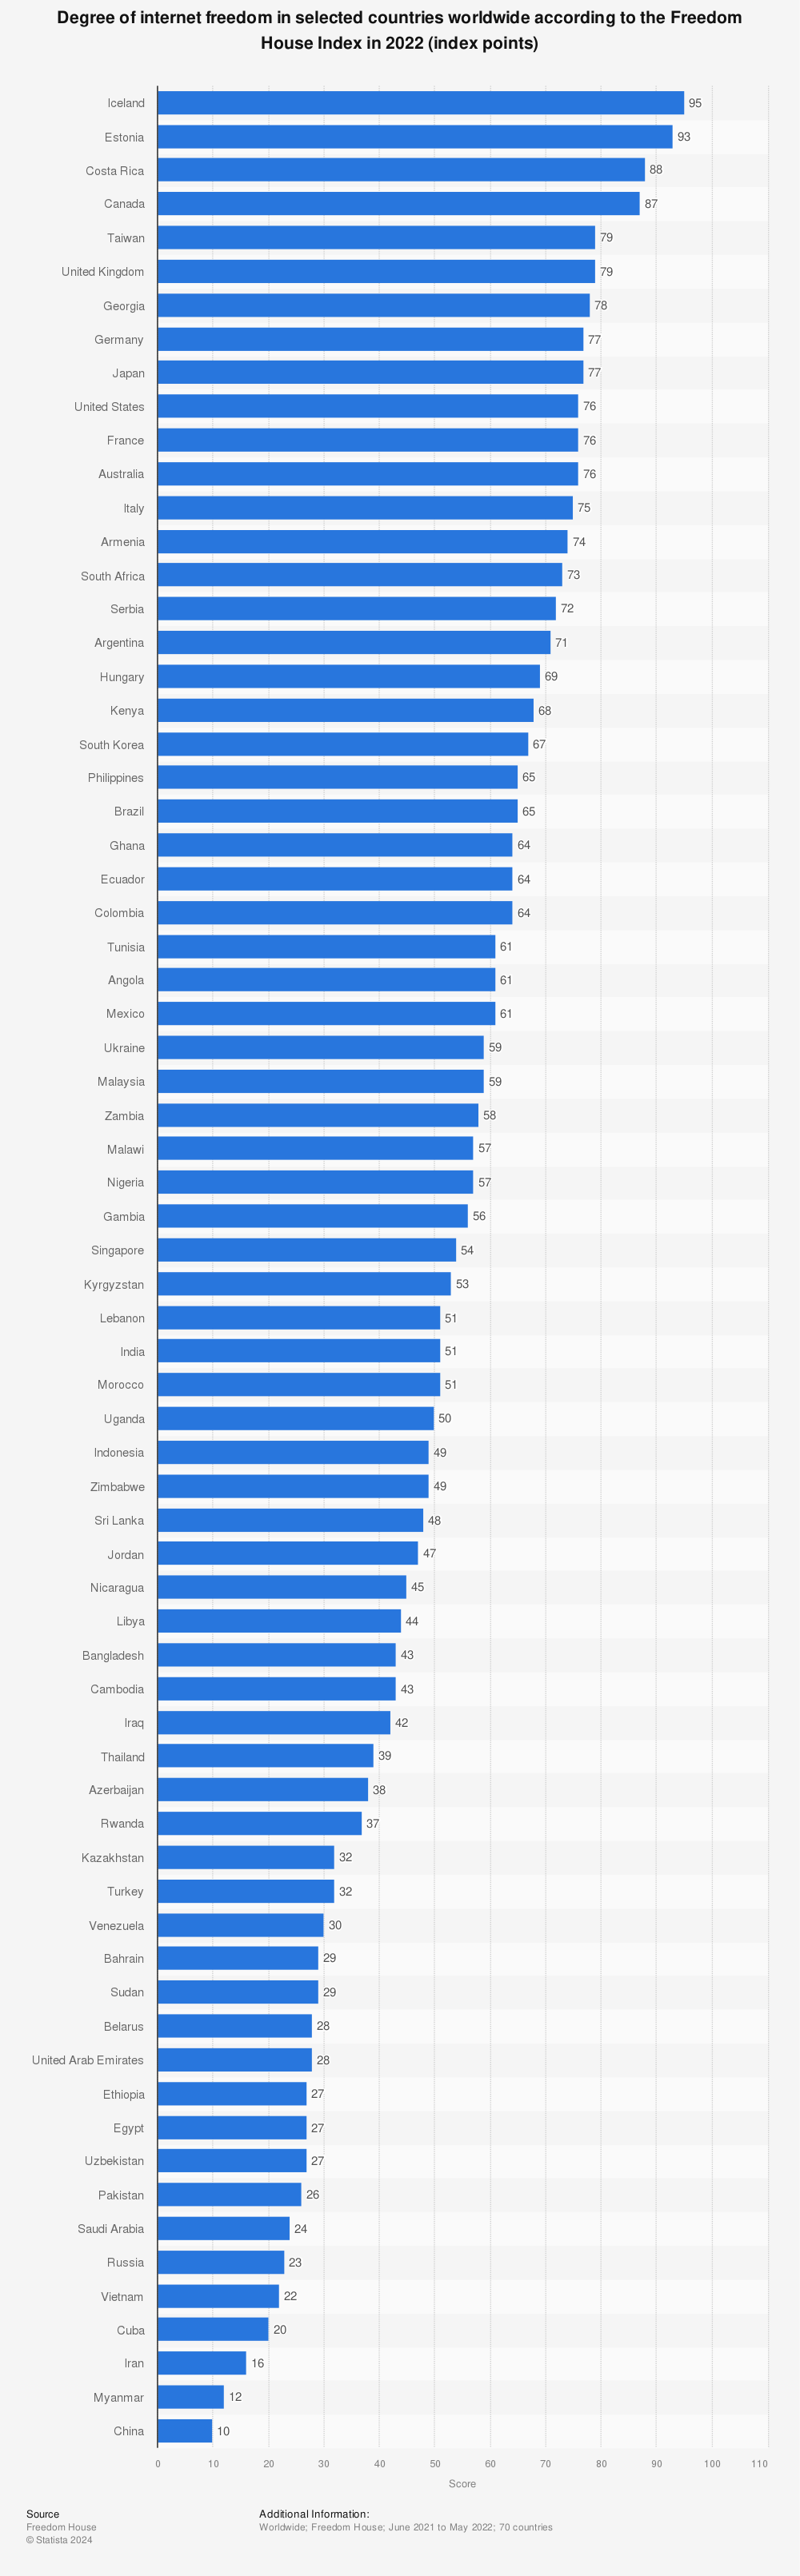 Statistic: Degree of internet freedom in selected countries worldwide according to the Freedom House Index in 2022 (index points) | Statista